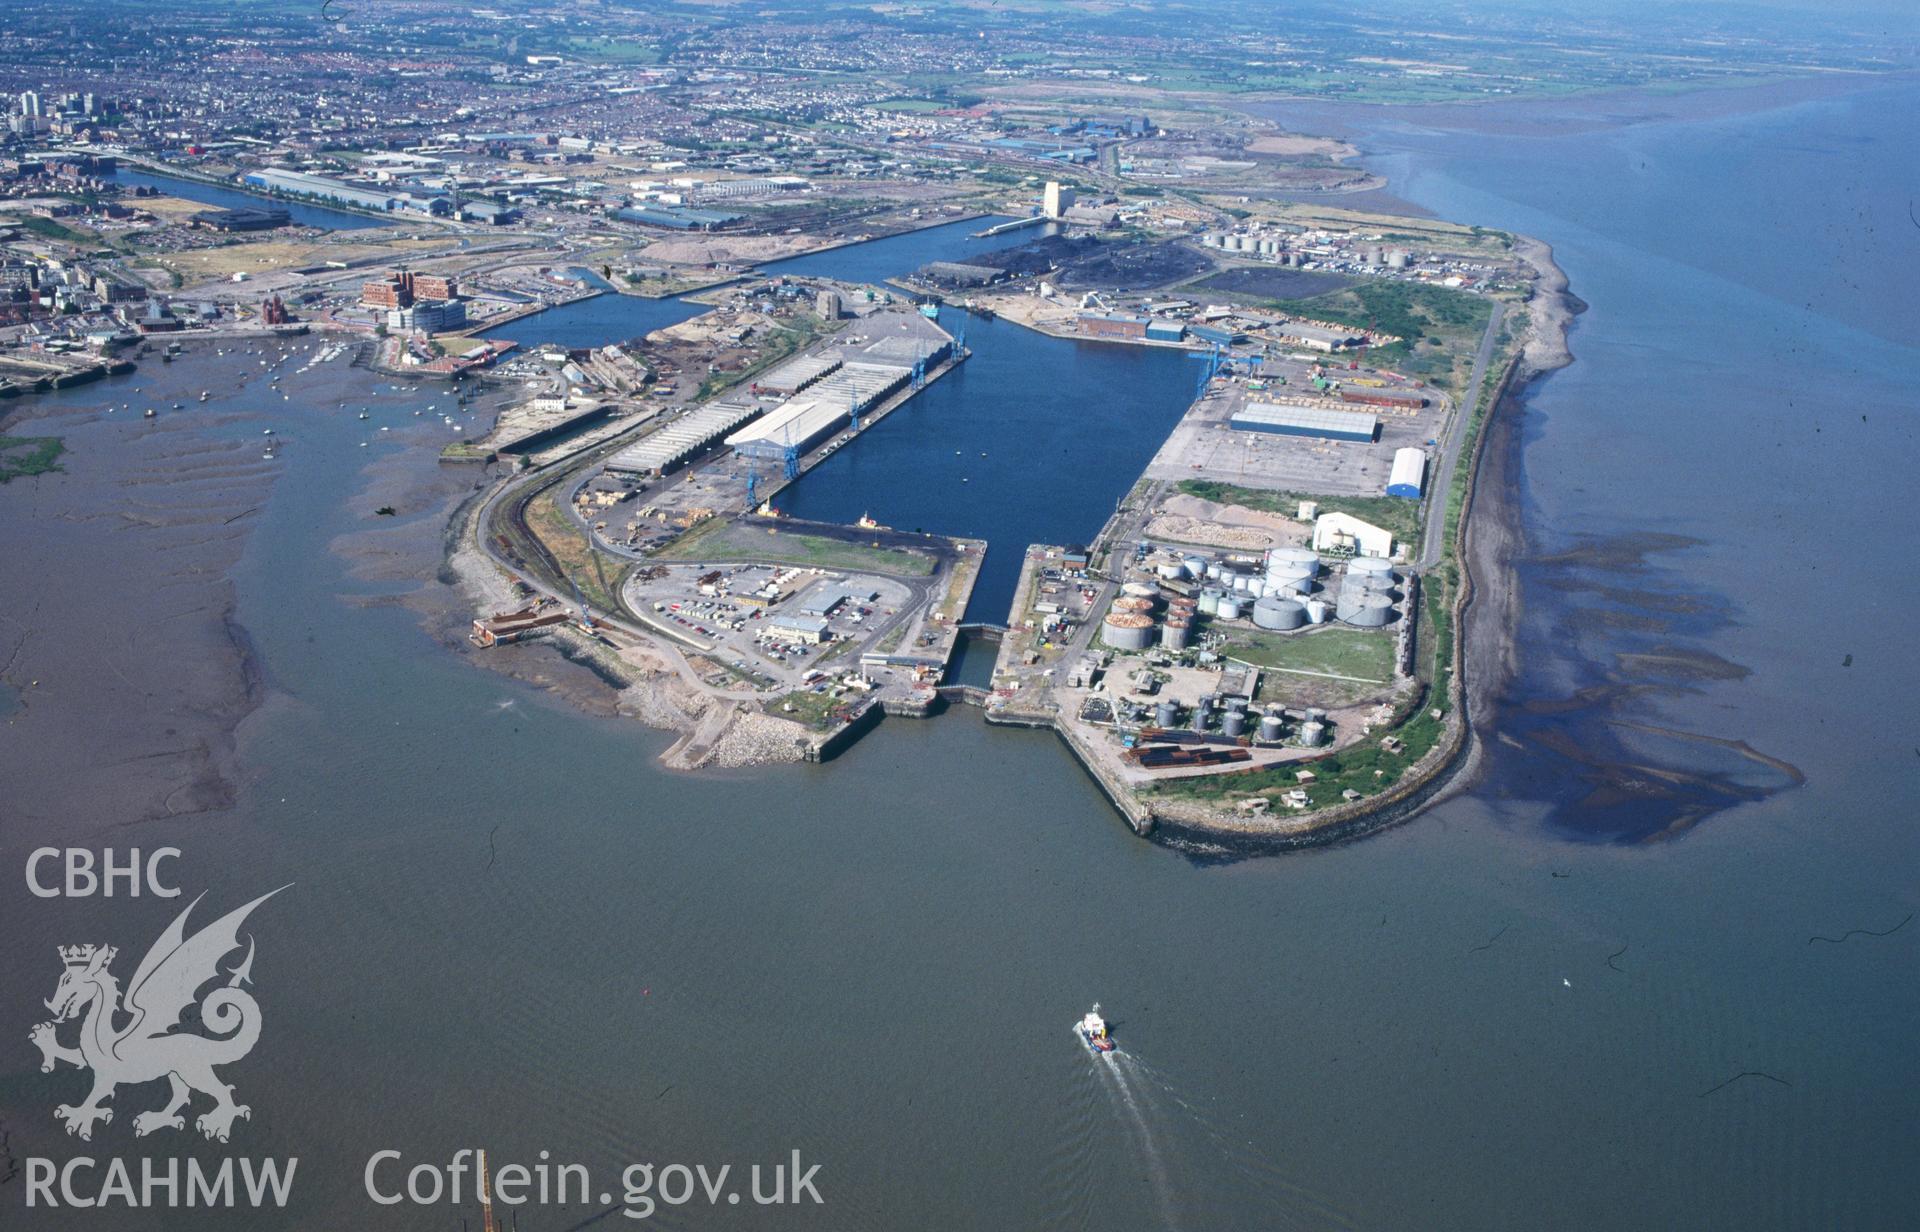 RCAHMW colour oblique aerial photograph of Queen Alexandra Dock, Cardiff Docks taken on 20/07/1995 by C.R. Musson